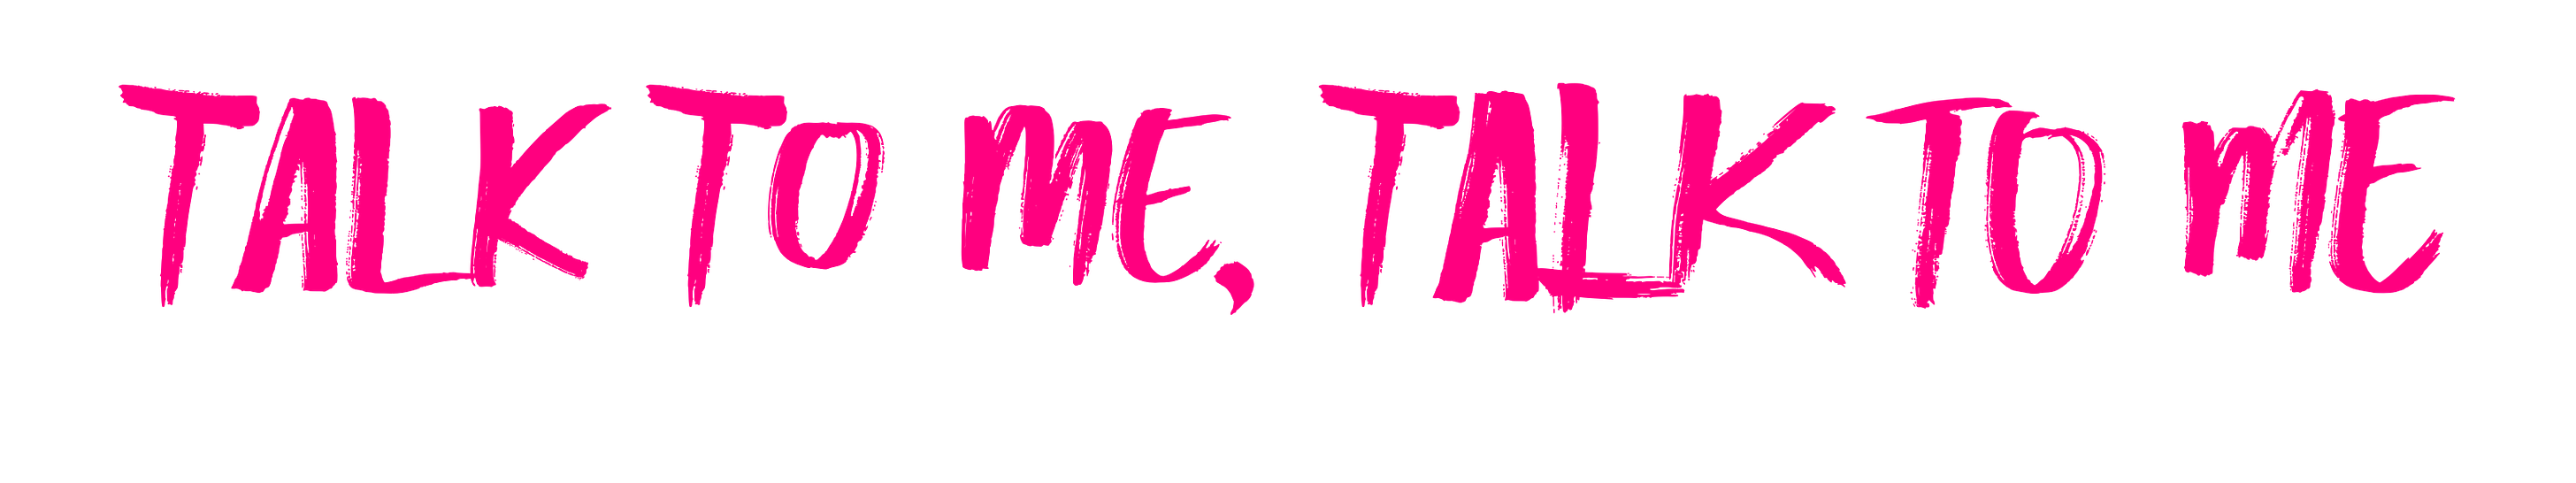 In pink painted letters it says, "Talk to me, talk to me."